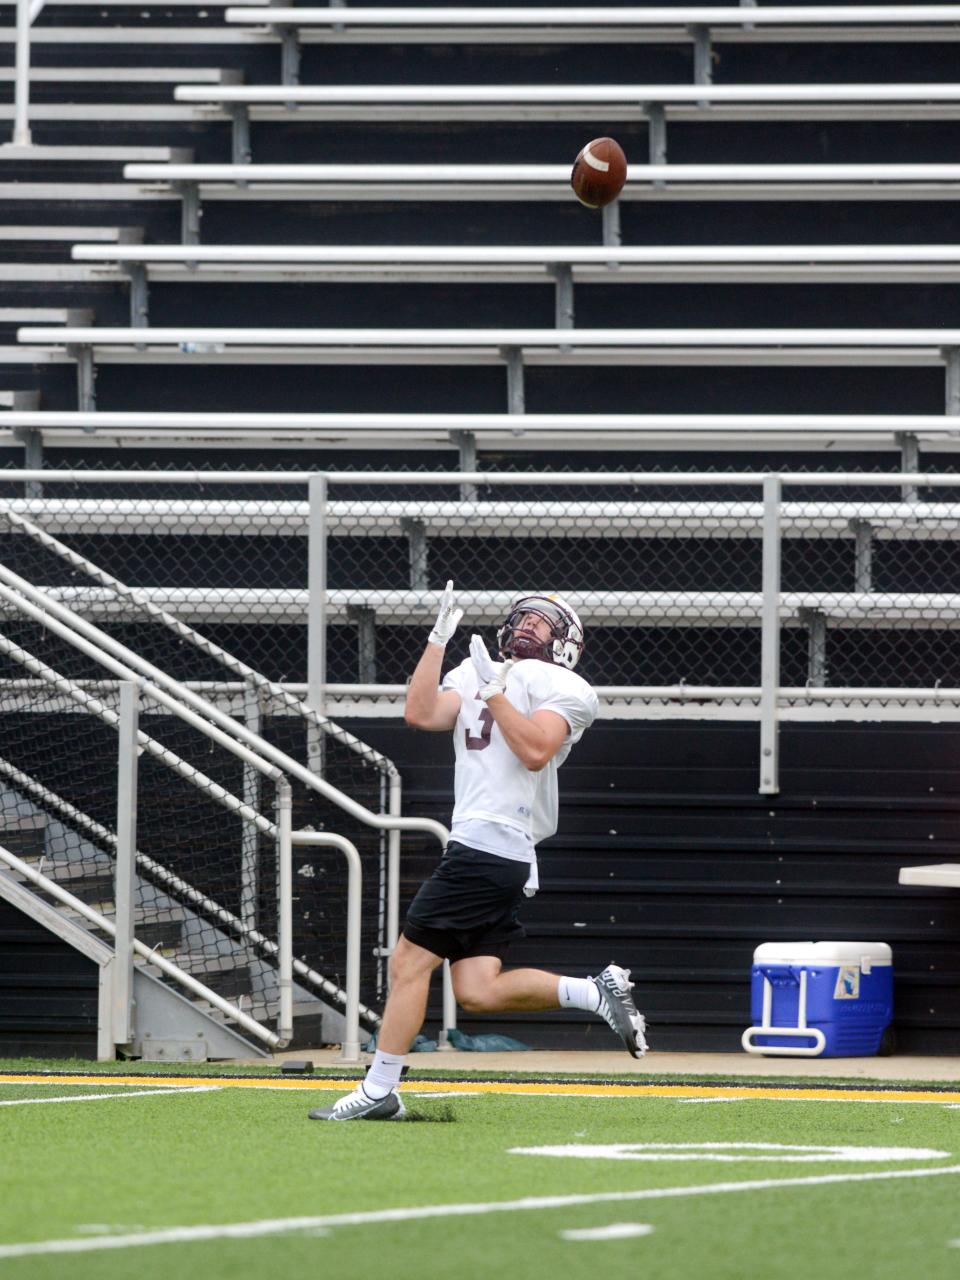 John Glenn's Blade Barclay hauls in a pass during Muskingum Valley League All-Star practice on Monday at Tri-Valley's Jack Anderson Stadium in Dresden.